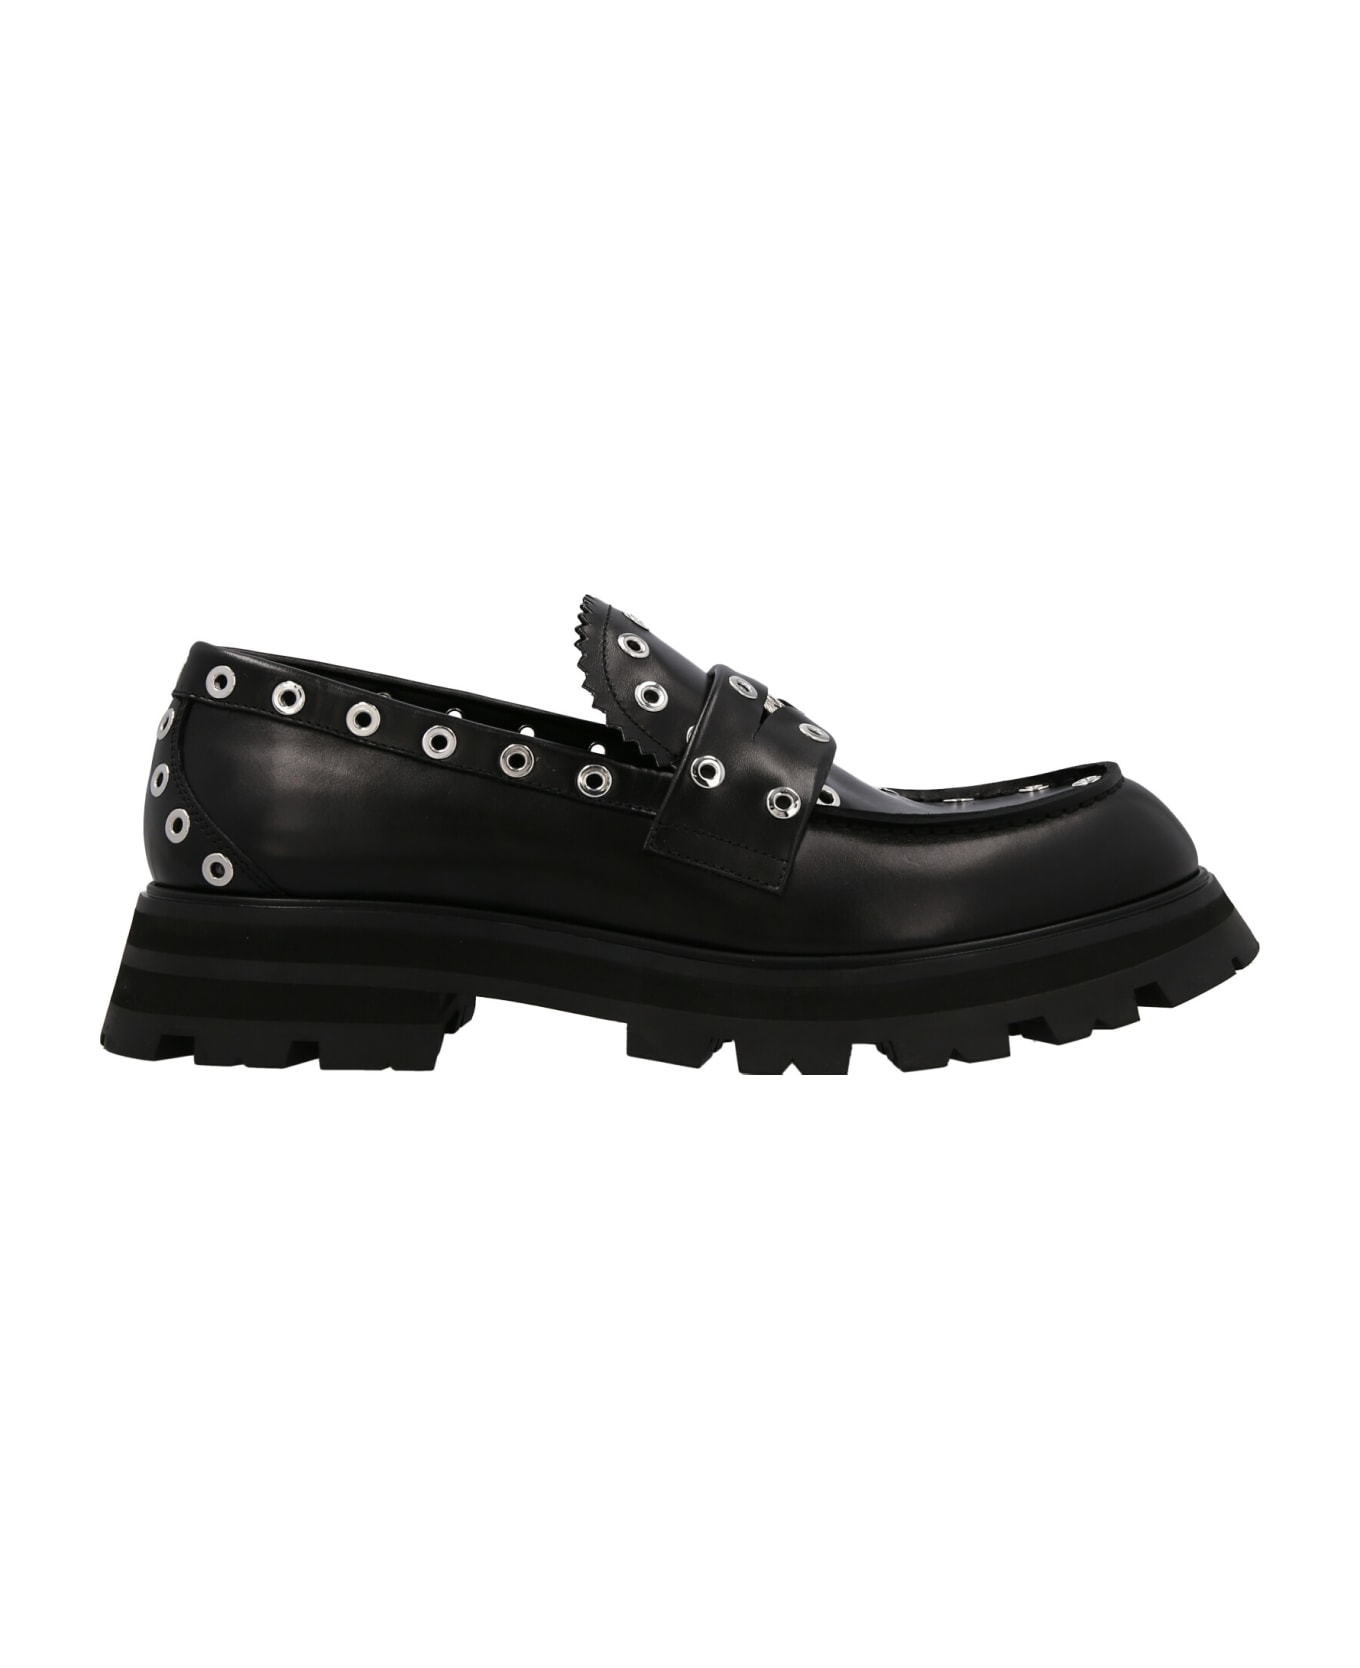 Alexander McQueen Chunky Stud Loafers - Black  